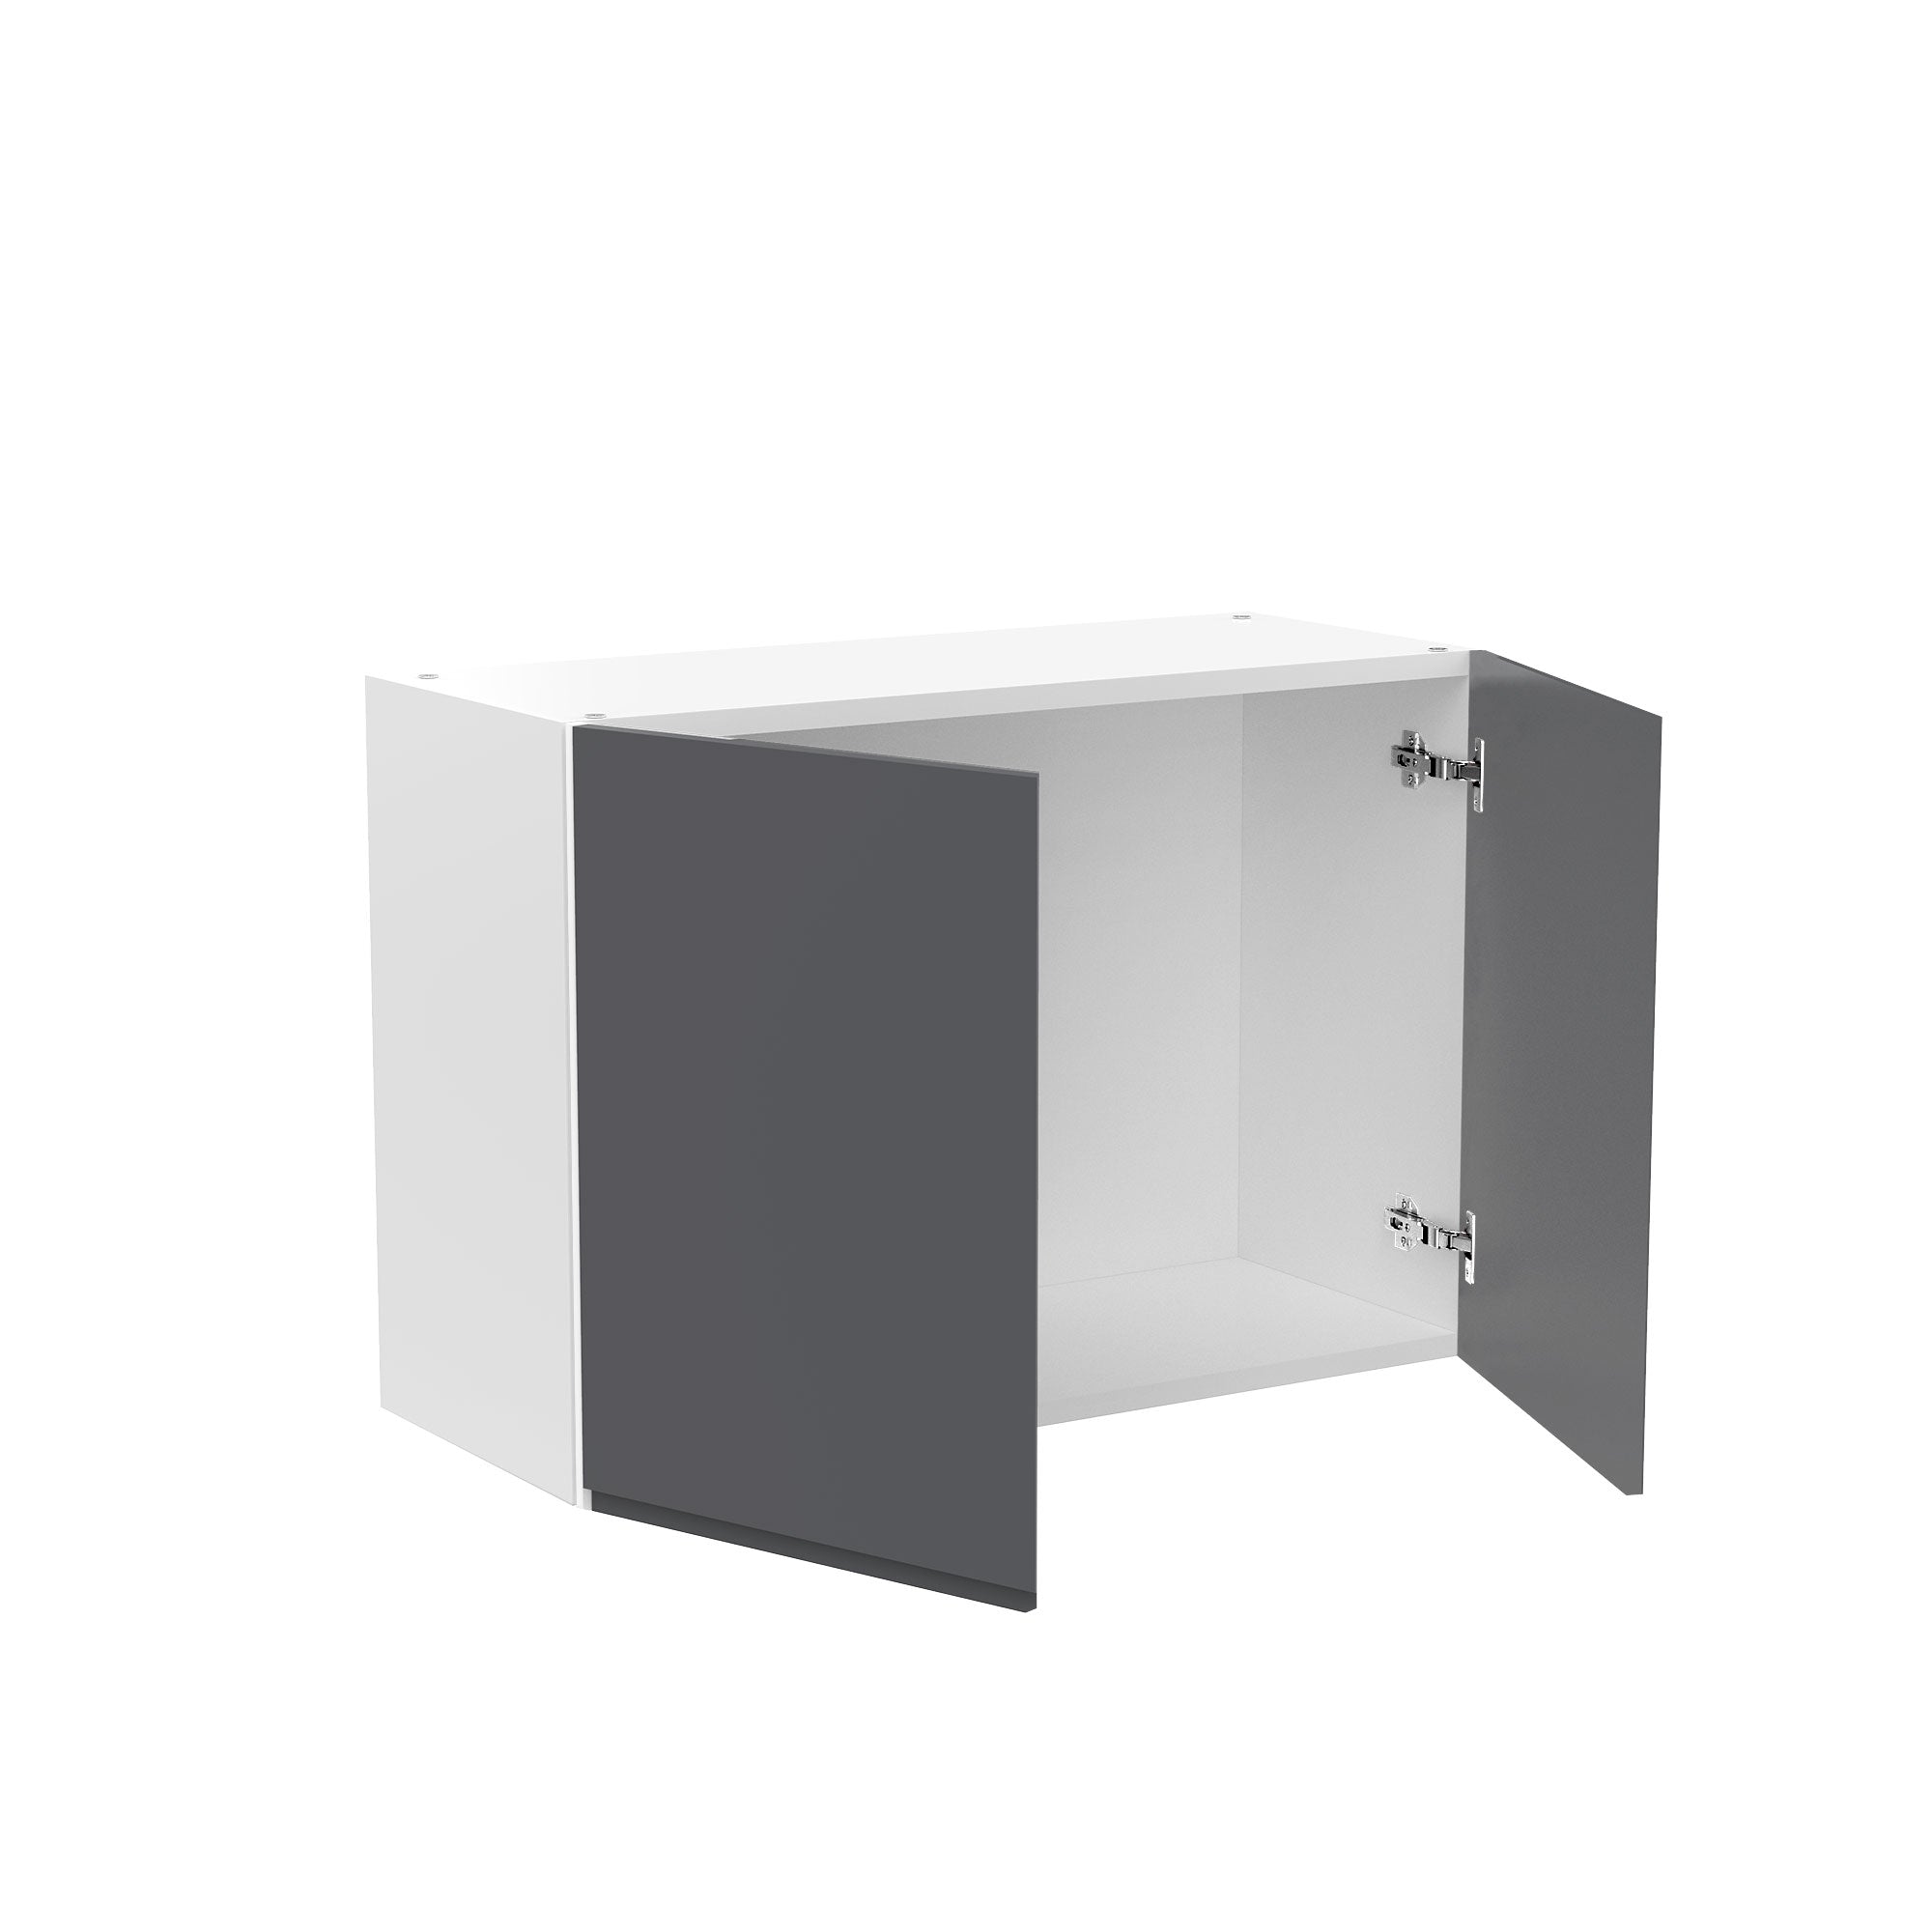 RTA - Lacquer Grey - Double Door Wall Cabinets | 33"W x 21"H x 12"D